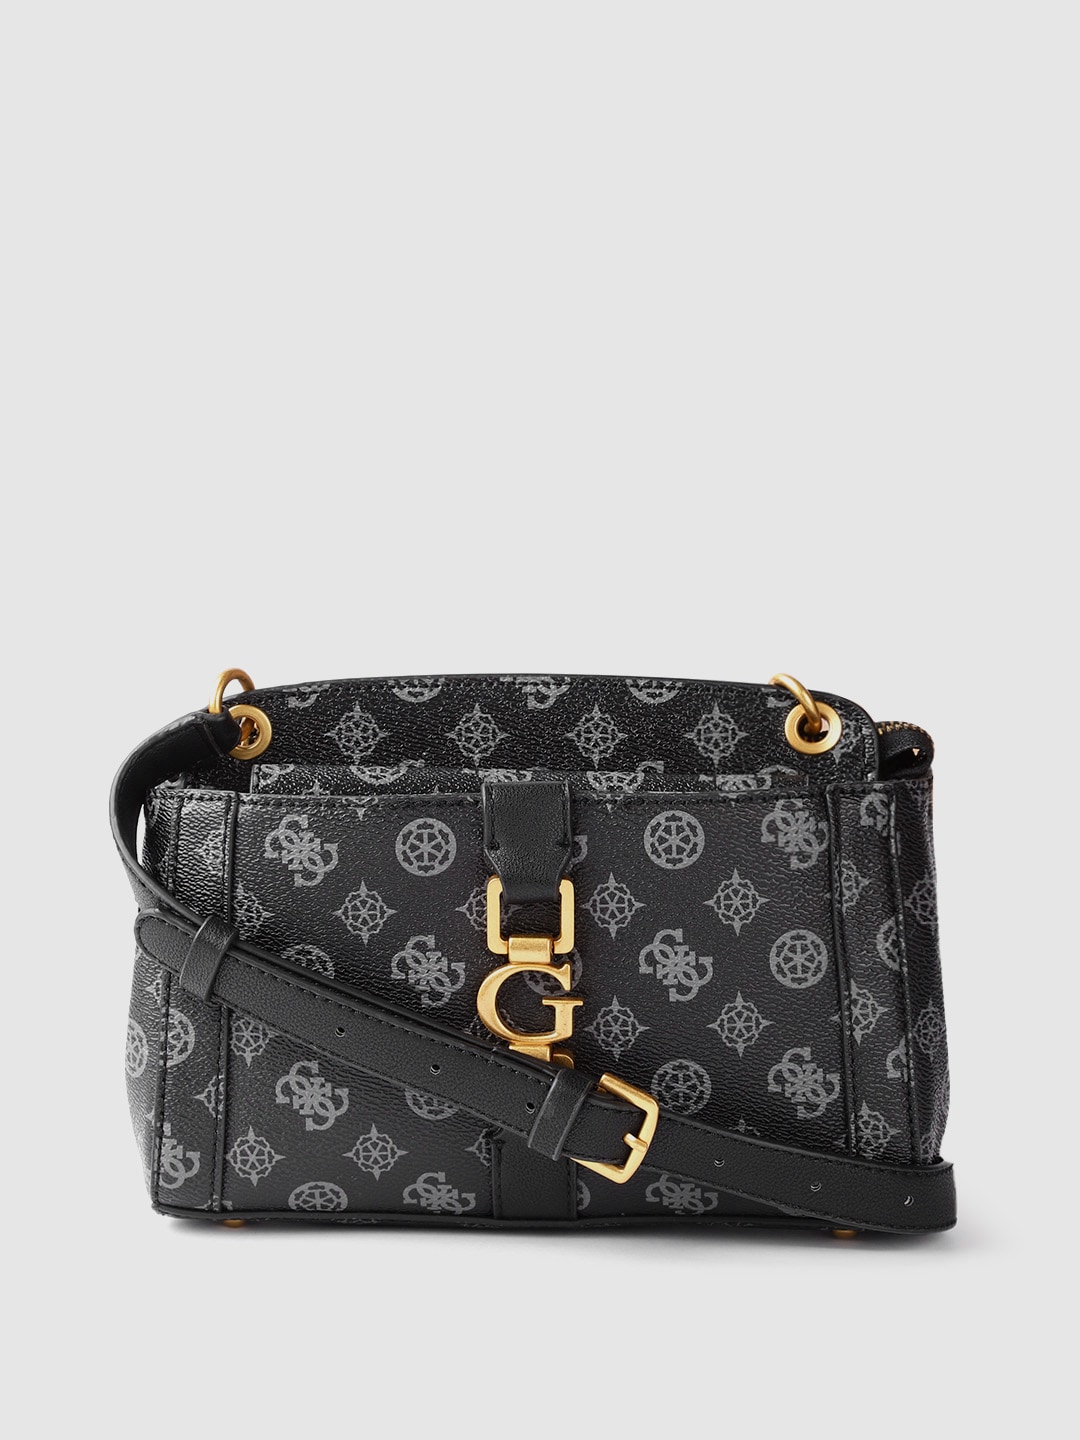 GUESS Women Black & Grey Brand Logo Printed Structured Sling Bag Price in India